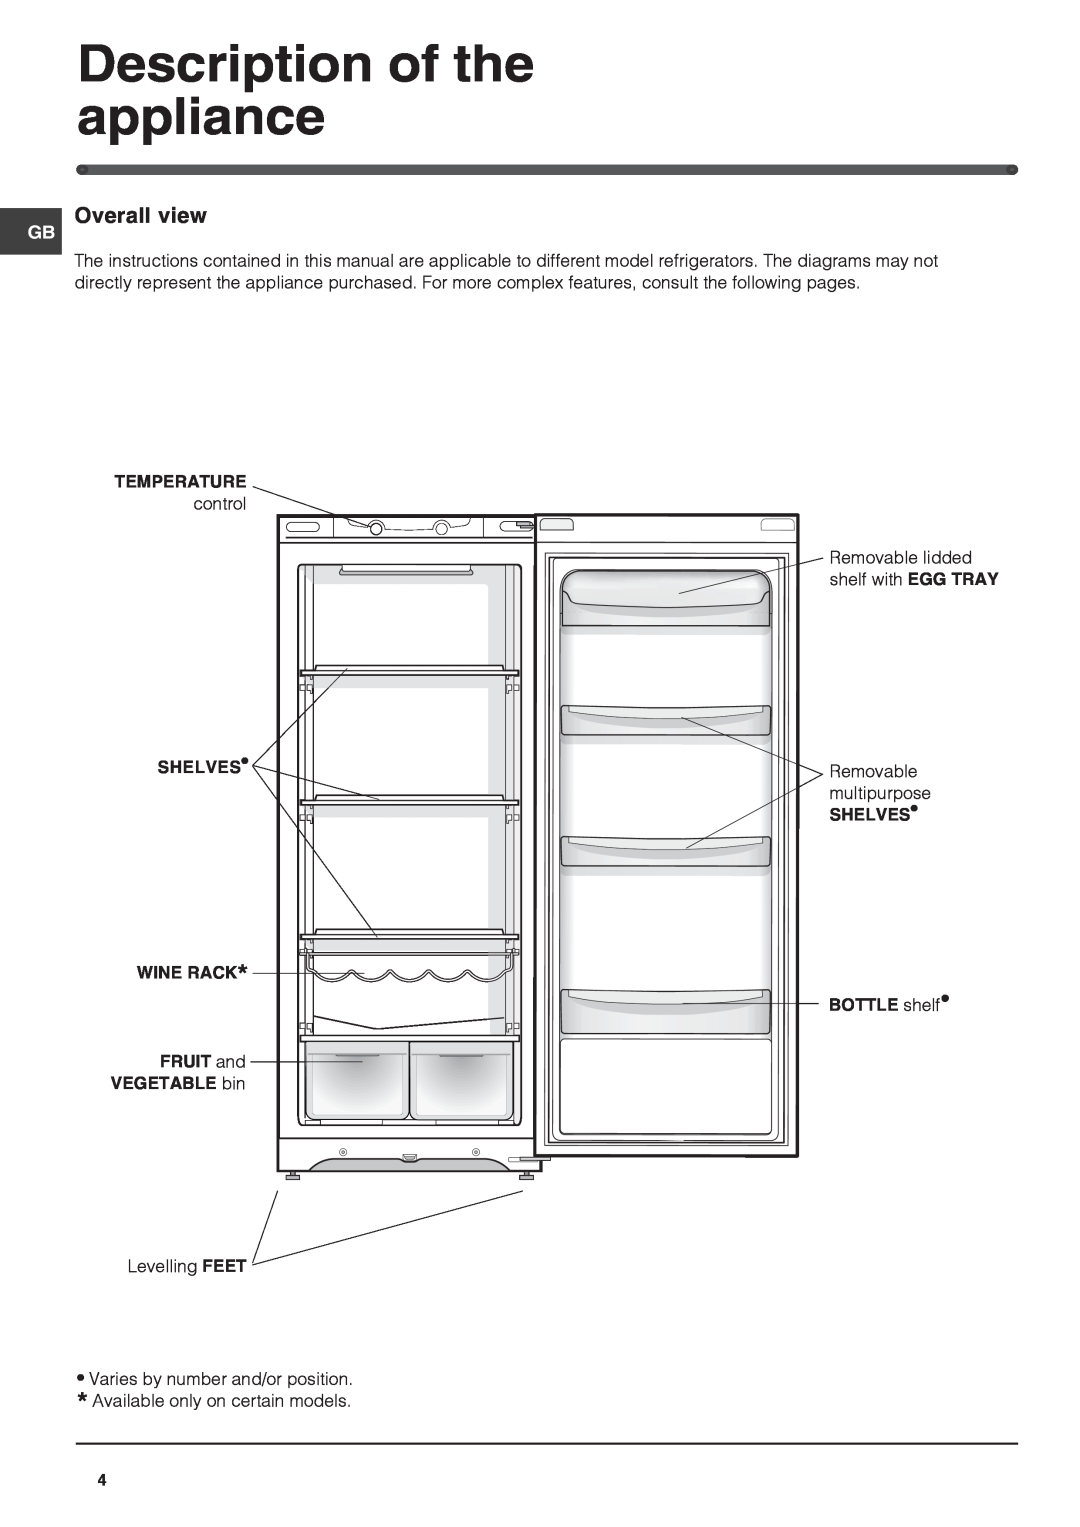 Hotpoint RLS150G manual Description of the appliance, Overall view, Temperature, SHELVES WINE RACK FRUIT and VEGETABLE bin 